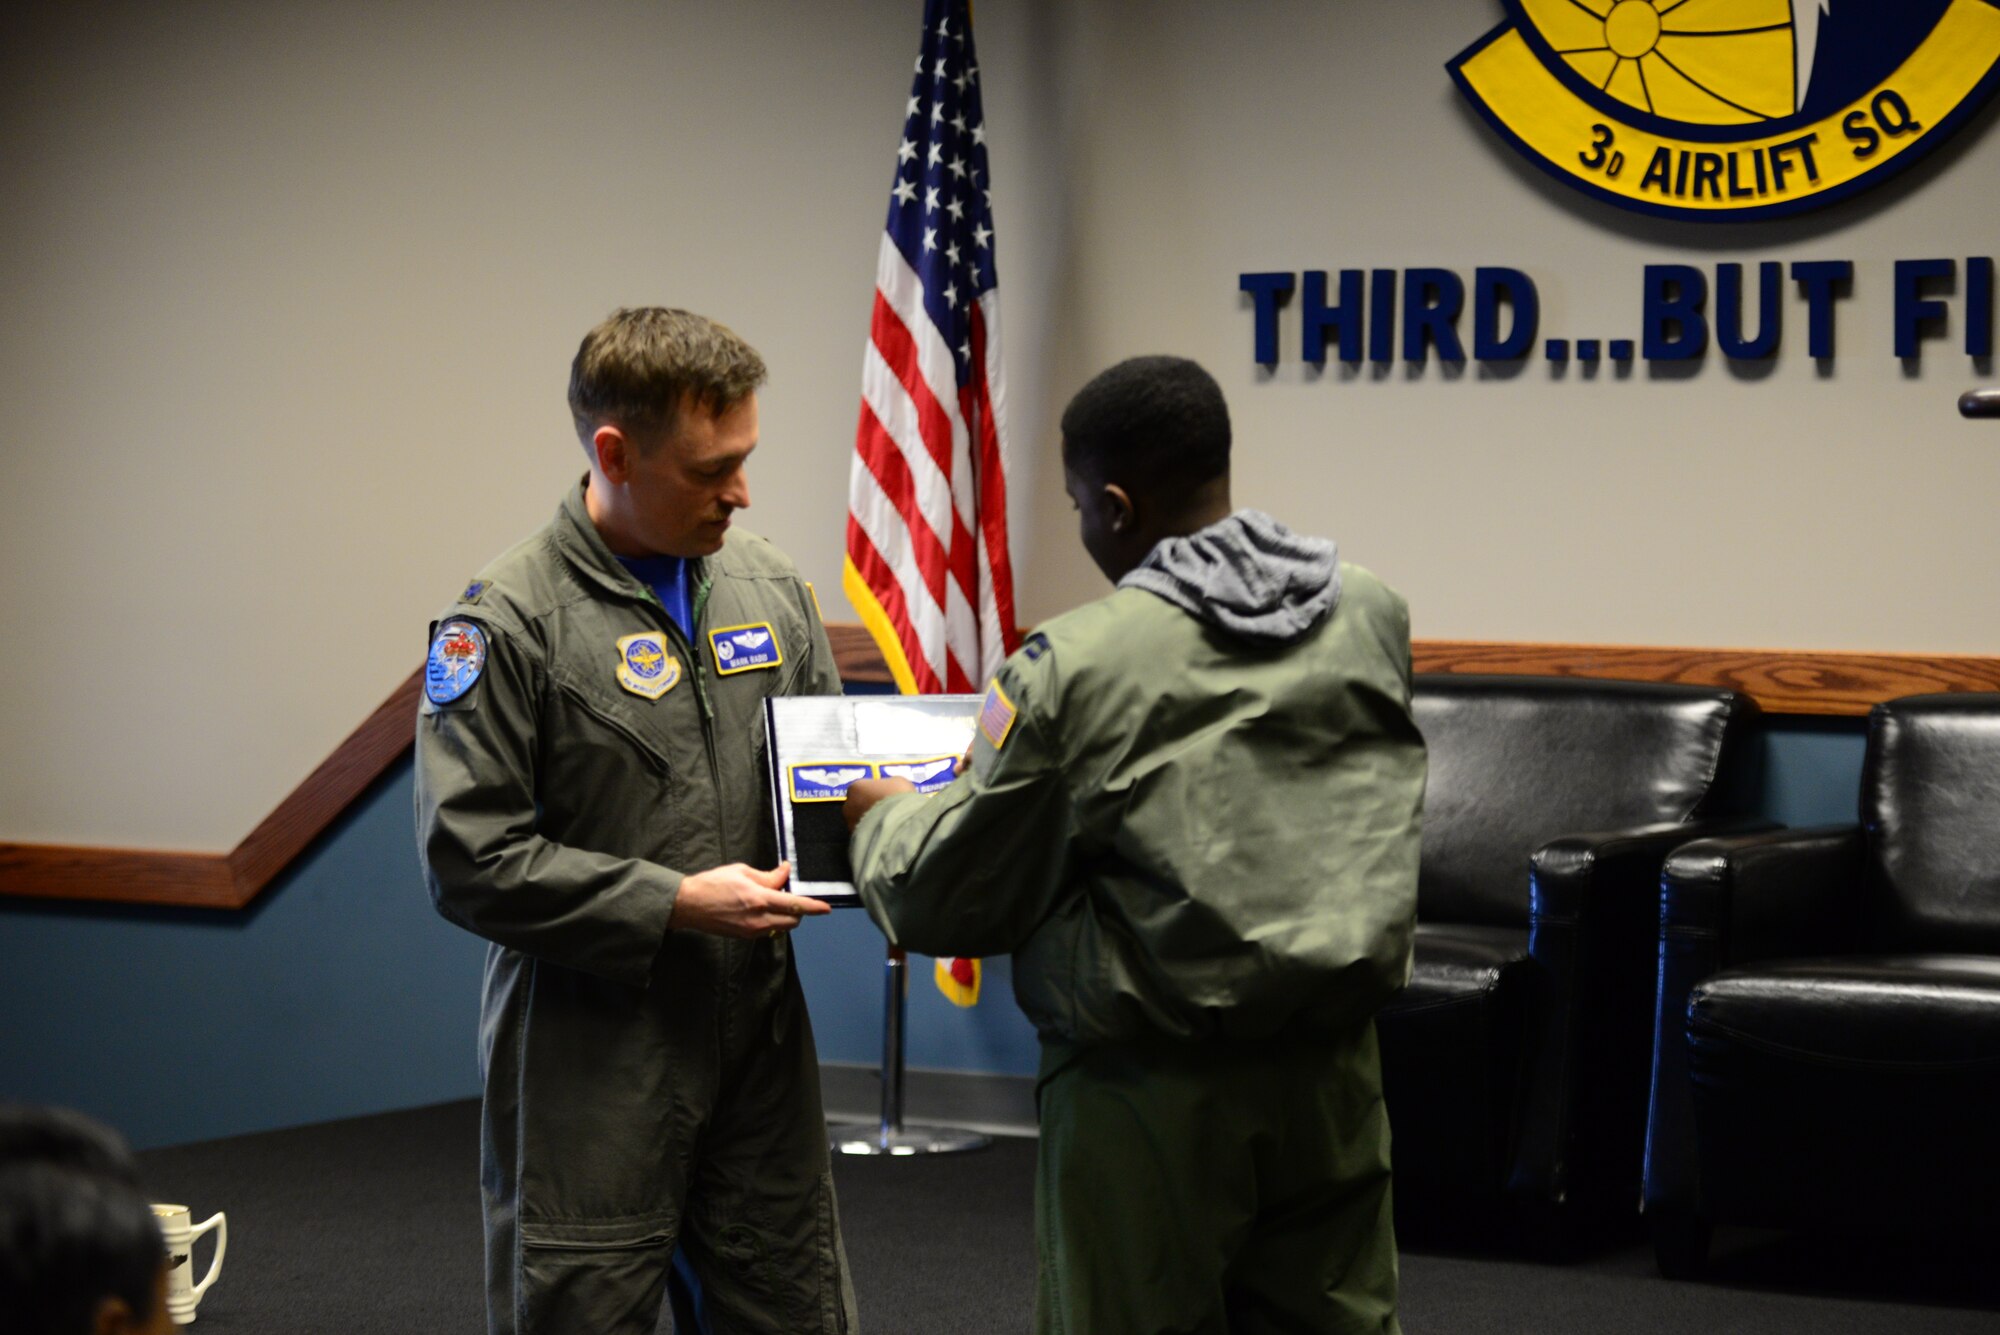 Lt. Col. Mark Radio, 3rd Airlift Squadron commander, holds the Pilot for a Day plaque while Kareem Bennett affixes his nametape to it during a squadron roll call March 16, 2018, at Dover Air Force Base, Del. Flying squadrons traditionally hold a ceremony for outgoing or retiring members that involves placing their nametape on a board to commemorate their service to the organization. (U.S. Air Force photo by Staff Sgt. Aaron J. Jenne)